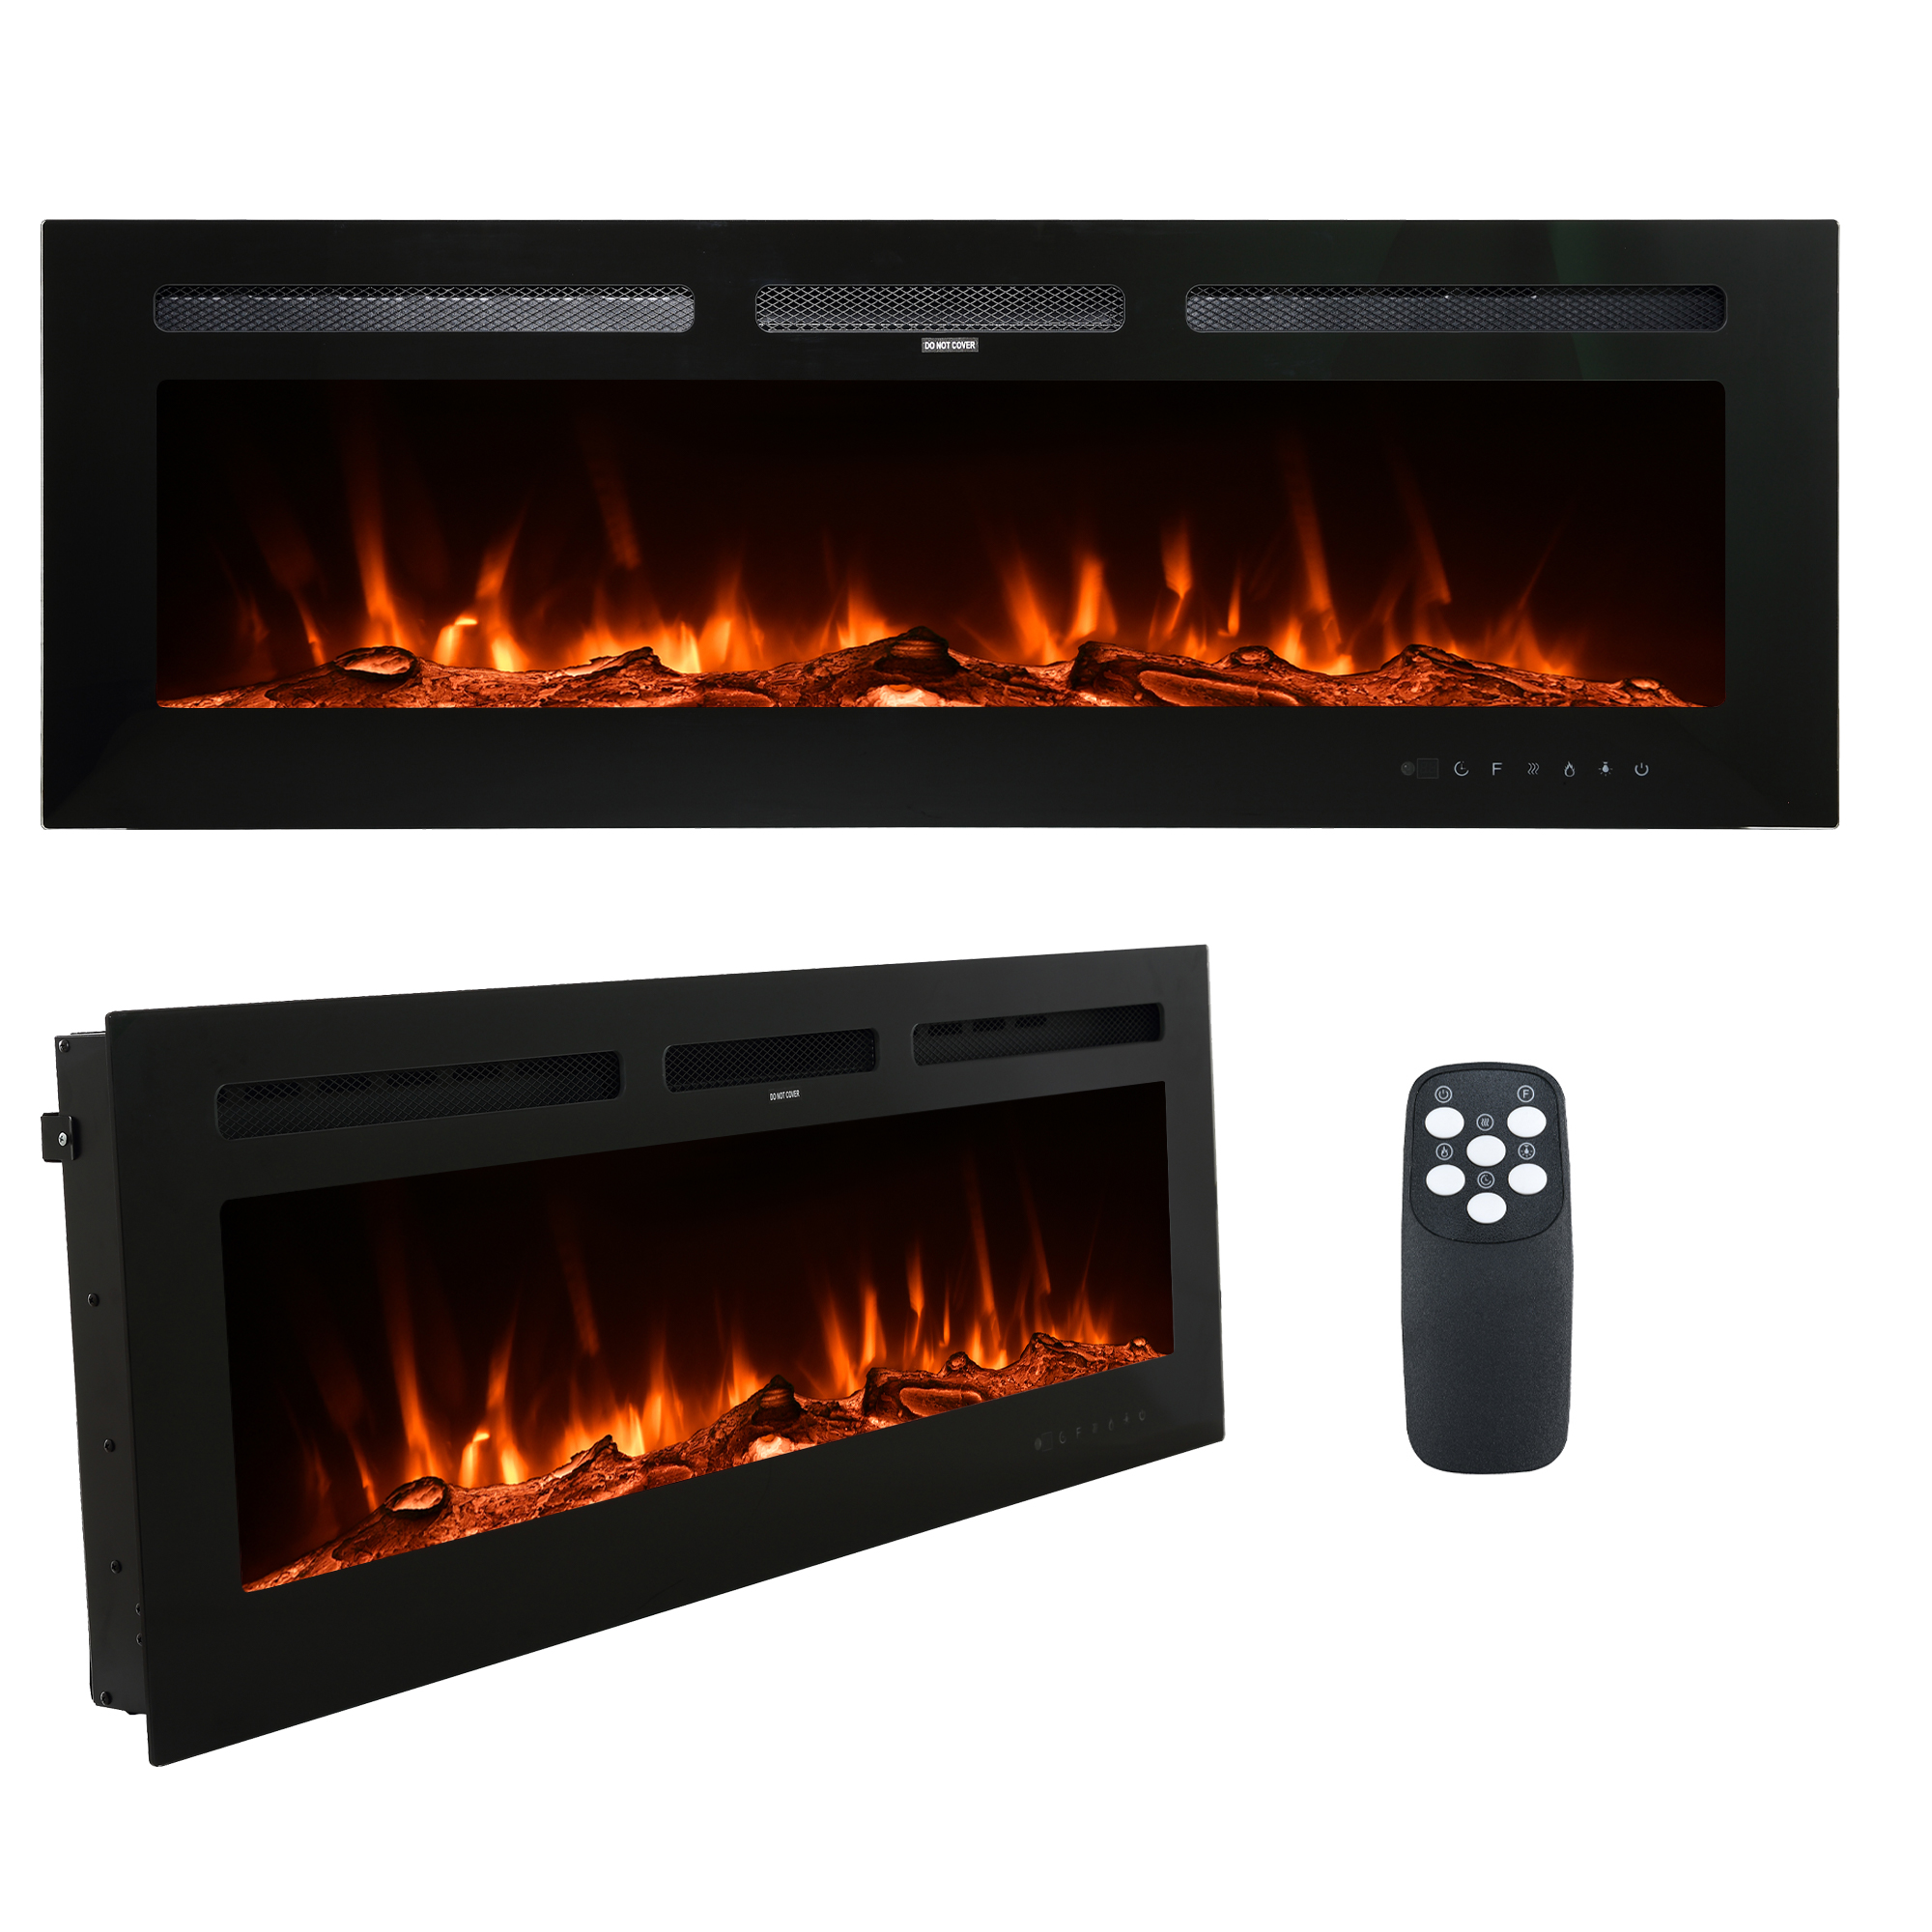 50-in LED Recessed Electric Fireplace with 3 Top Light Colors, Remote Control, Adjustable Heating, and Touch Screen 1500W, Black-Mondawe